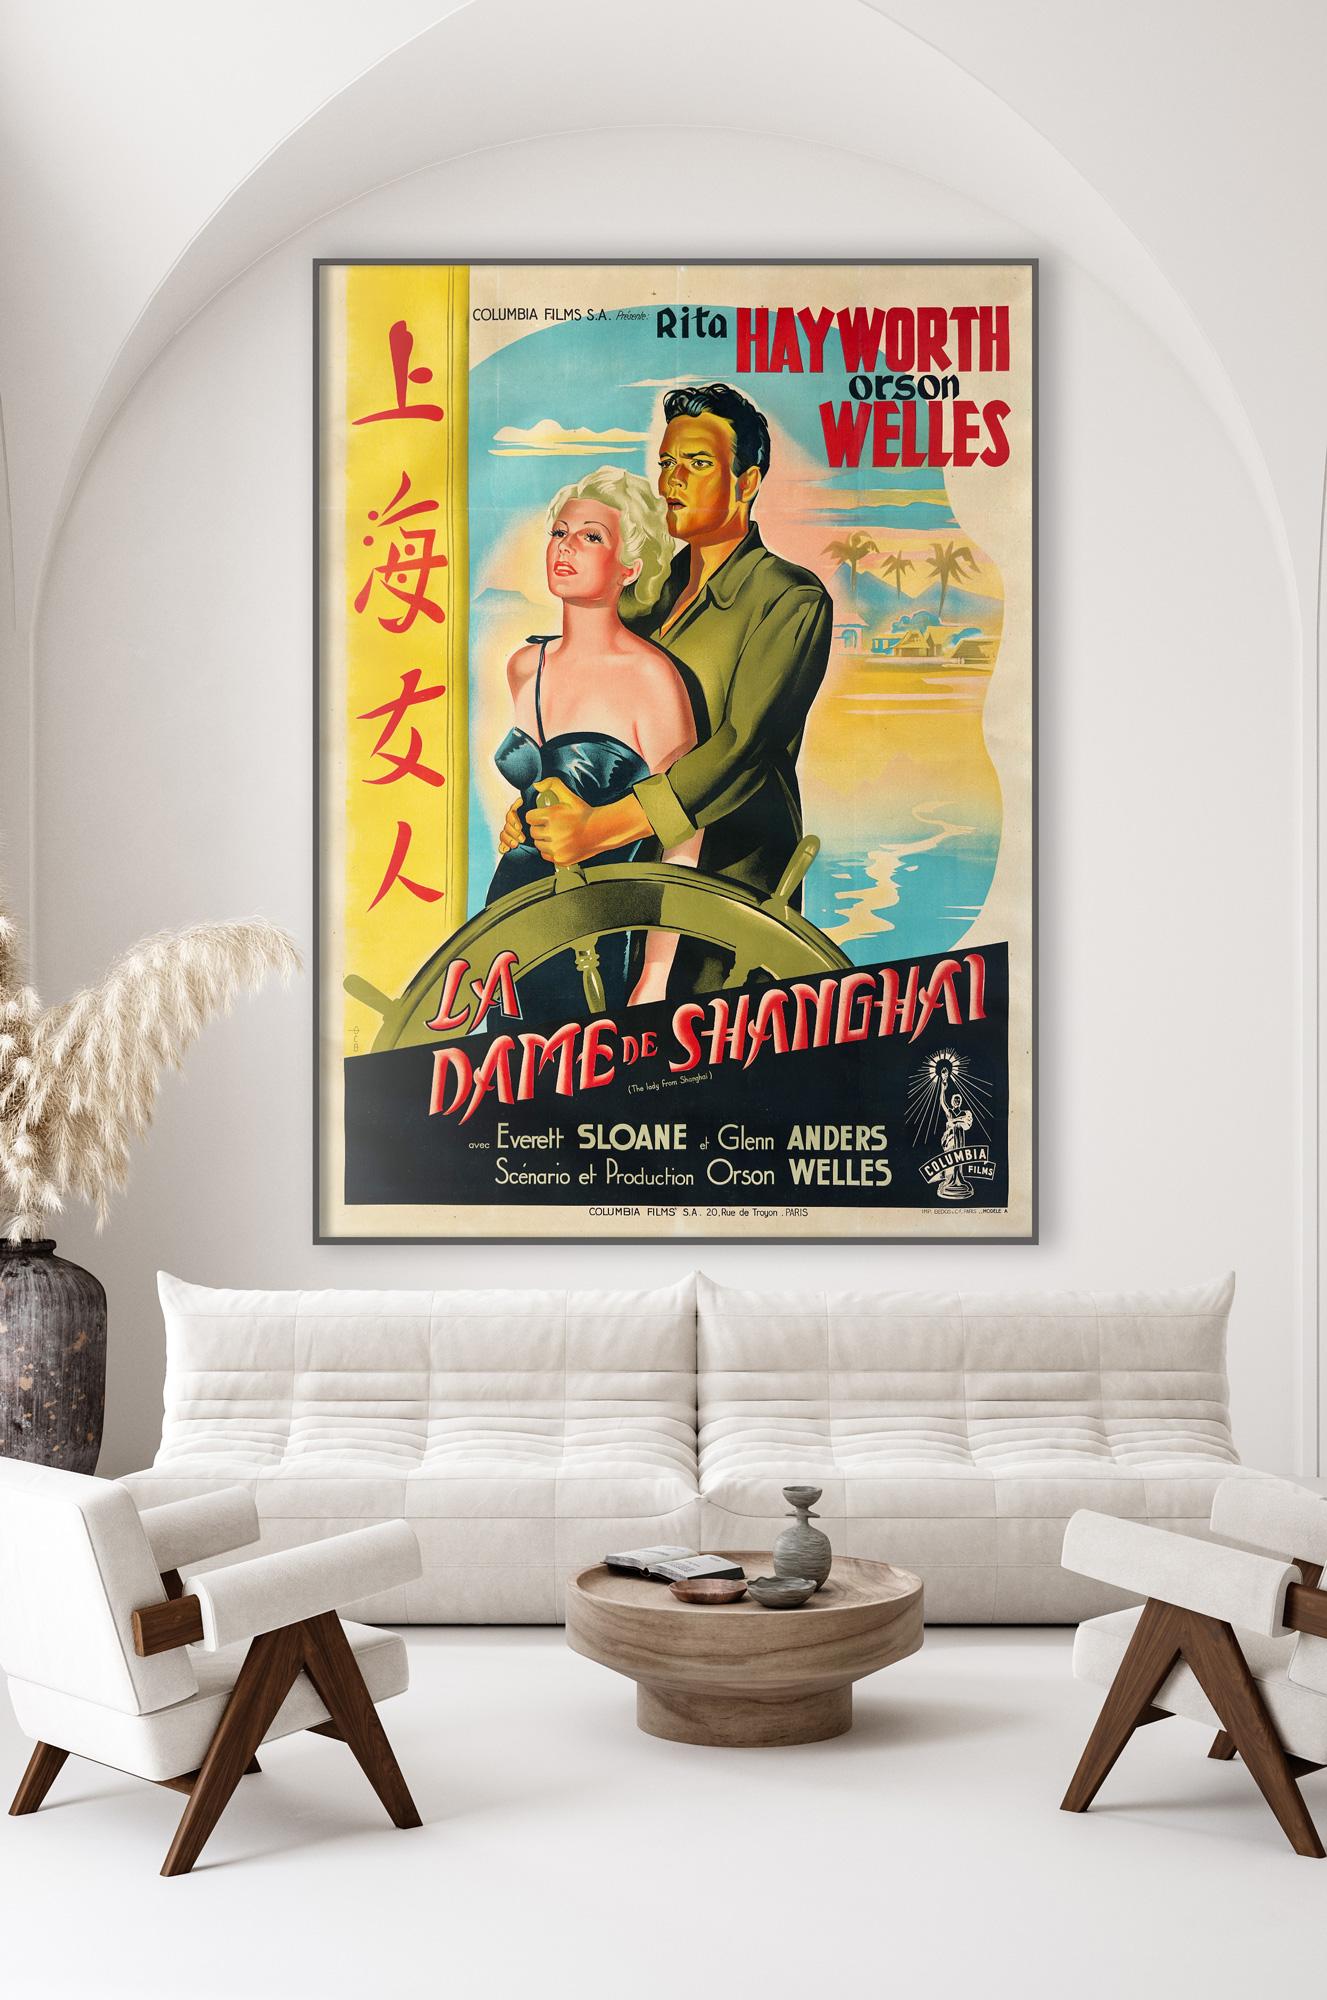 Impossibly rare and incredibly beautiful original first-year-of-release French Grande Style A film poster for Orson Welles' 1940s classic The Lady from Shanghai.

In film noir The Lady from Shanghai, fascinated by gorgeous Mrs. Bannister (Rita